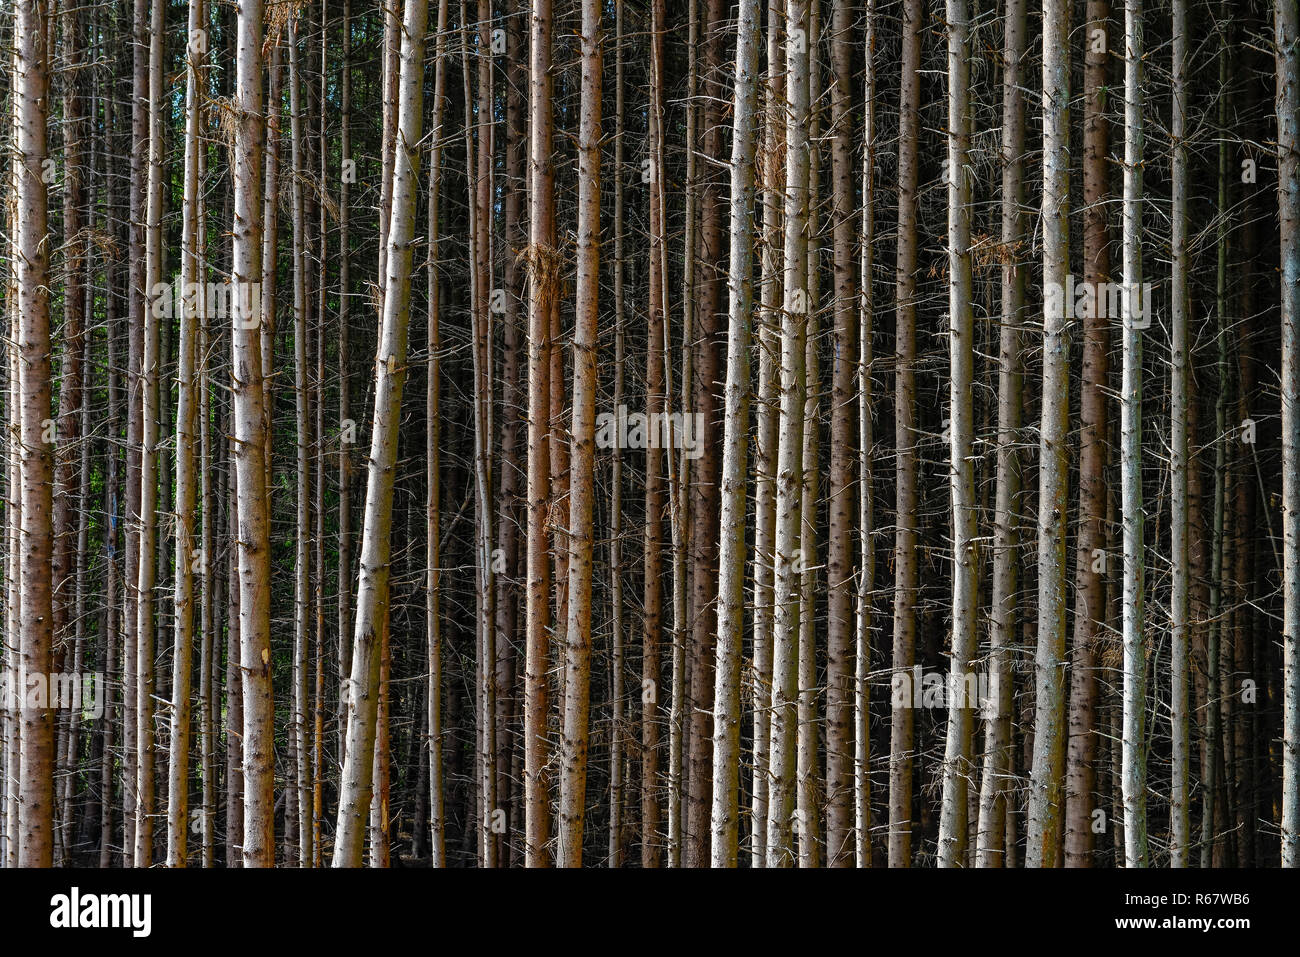 Narrow standing tree trunks of a Spruces protection (Picea), Rhineland-Palatinate, Germany Stock Photo